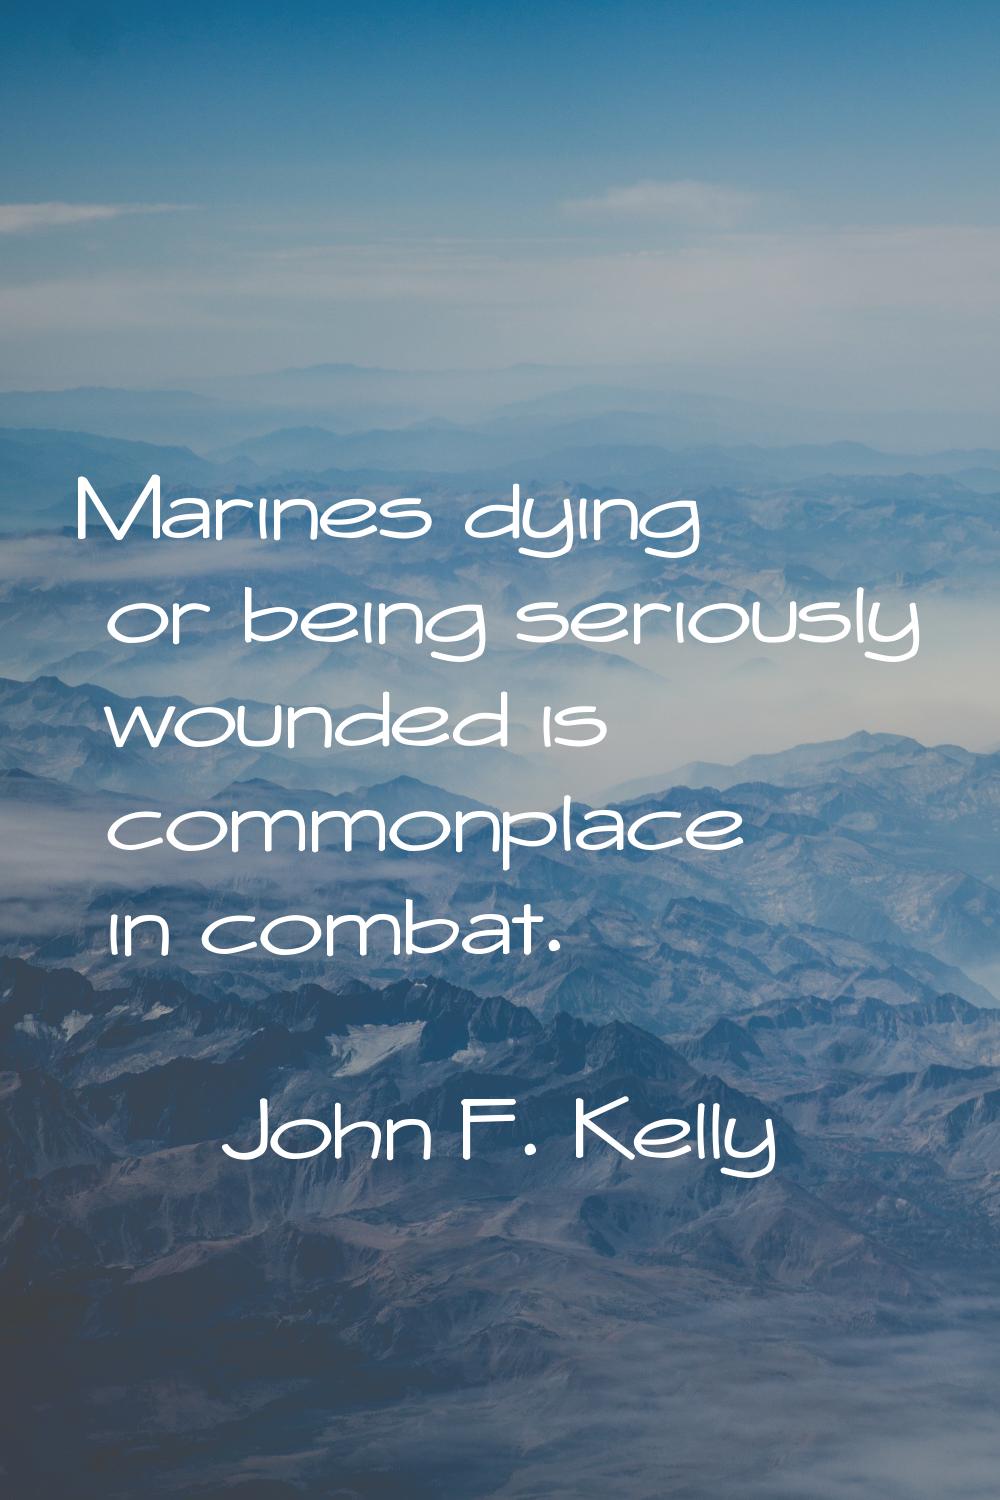 Marines dying or being seriously wounded is commonplace in combat.